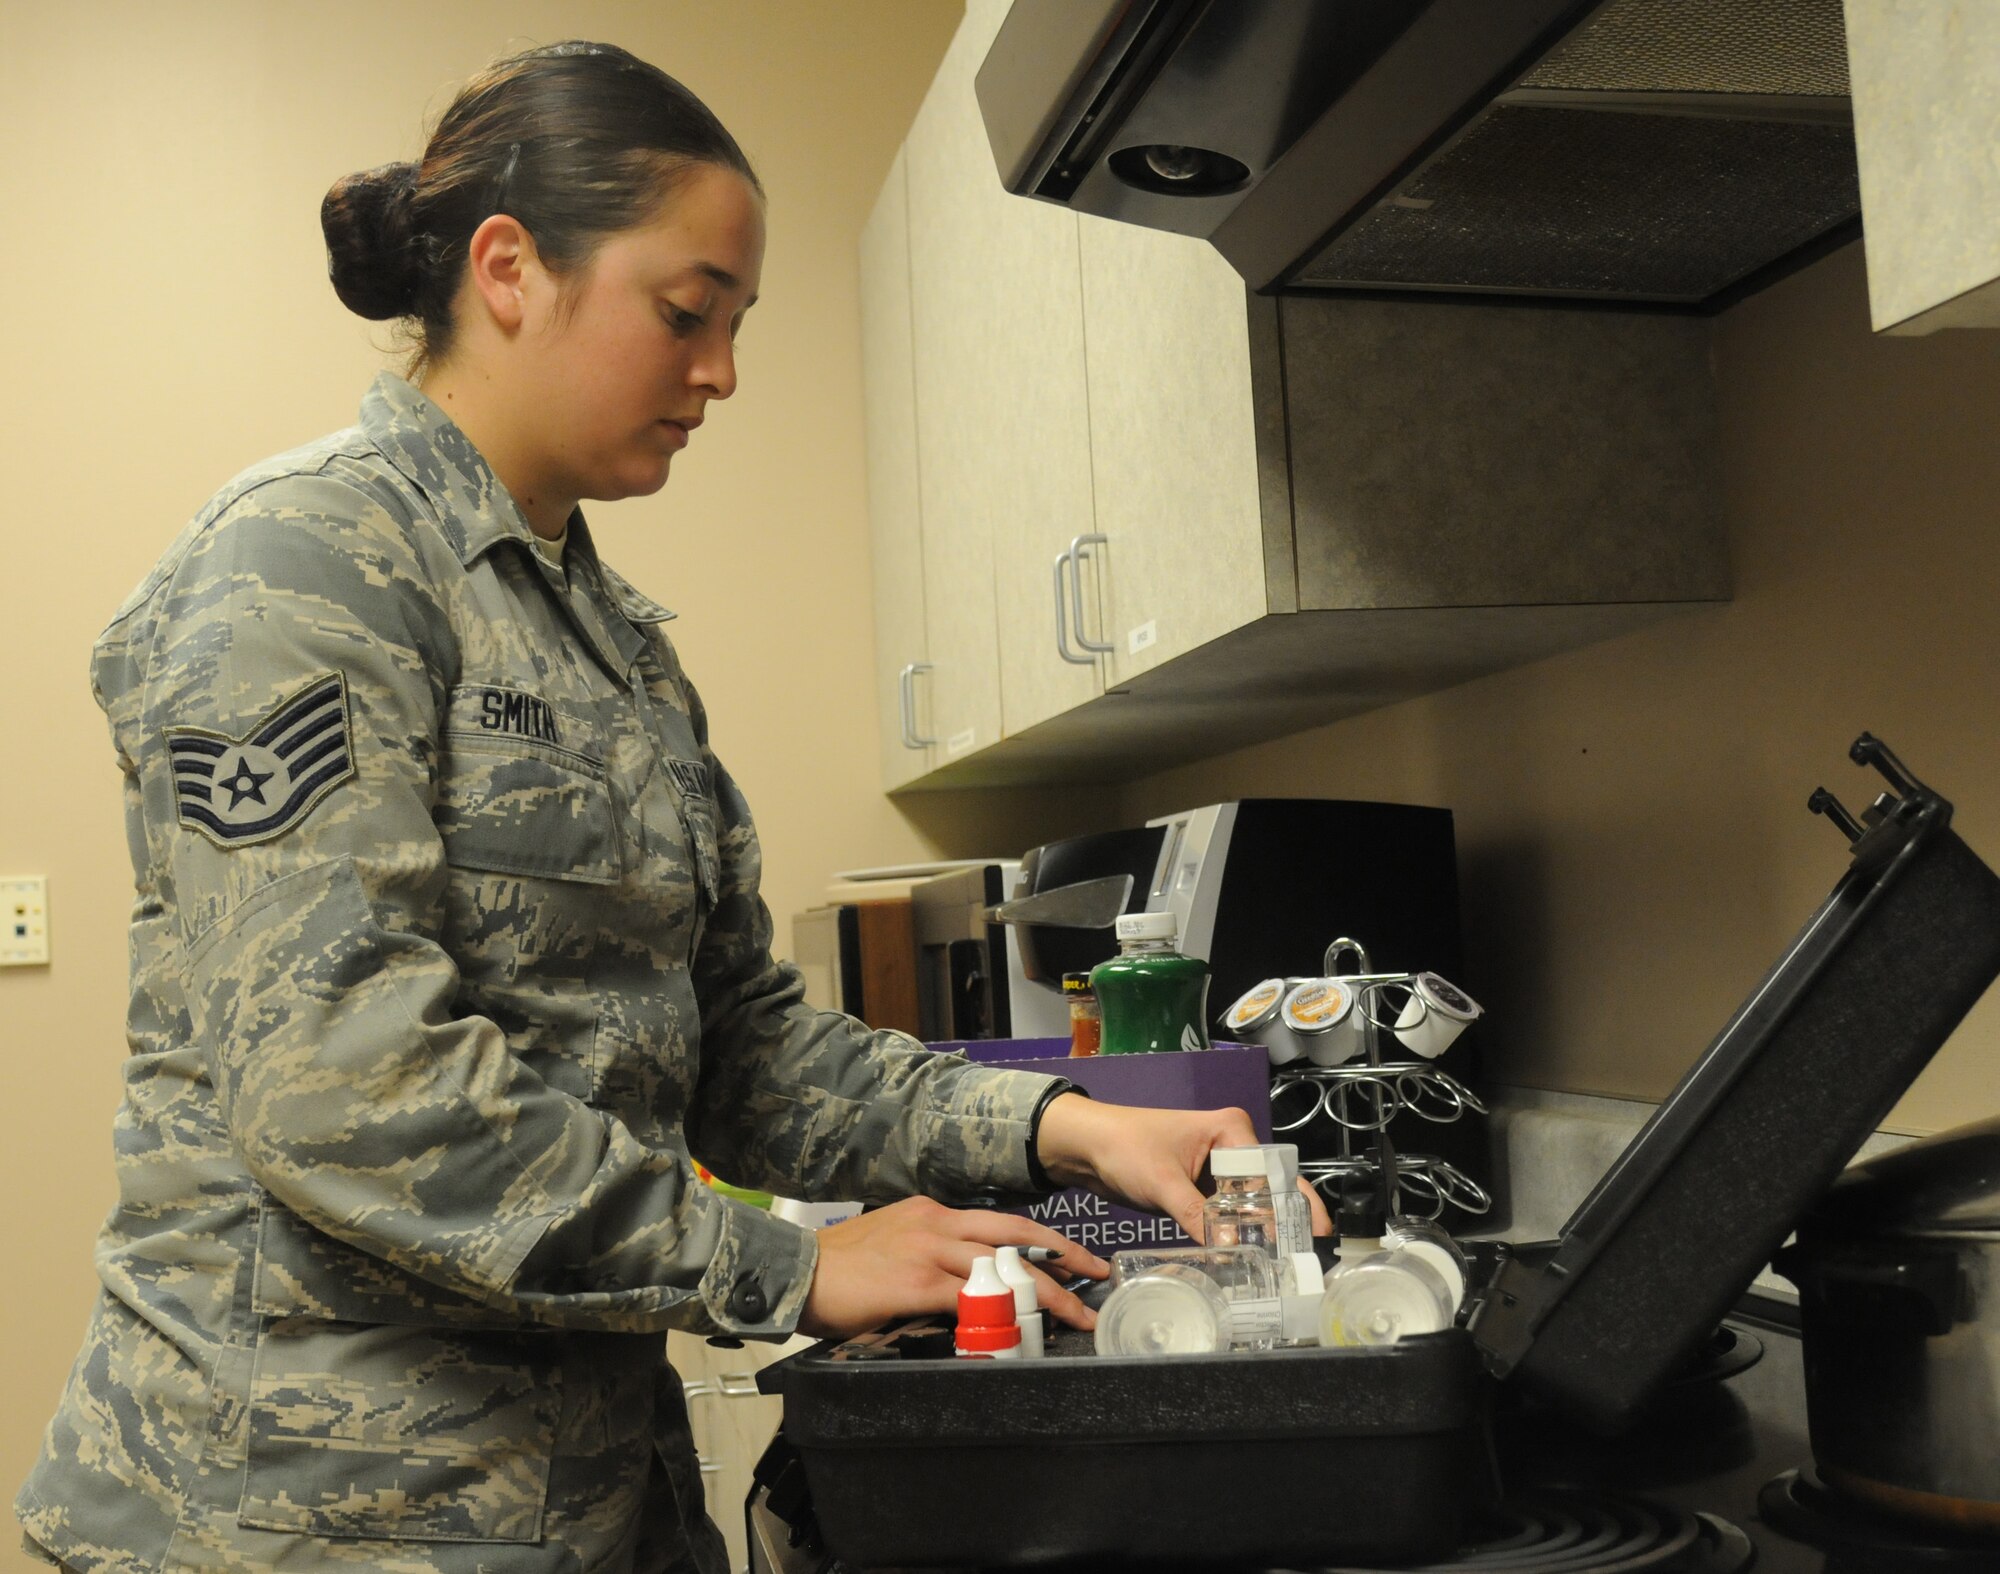 Staff Sgt. Tori Smith, 81st Aerospace Medicine Squadron environmental health NCO in charge, performs a water sample screening Nov. 2, 2017, on Keesler Air Force Base, Mississippi. The eight-man 81st AMDS Bioenvironmental team performs routine water checks, noise screenings, respiratory fit tests and ventilation tests along with HAZMAT emergency response to prevent occupational health hazards on Keesler AFB. (U.S. Air Force photo by Senior Airman Holly Mansfield)